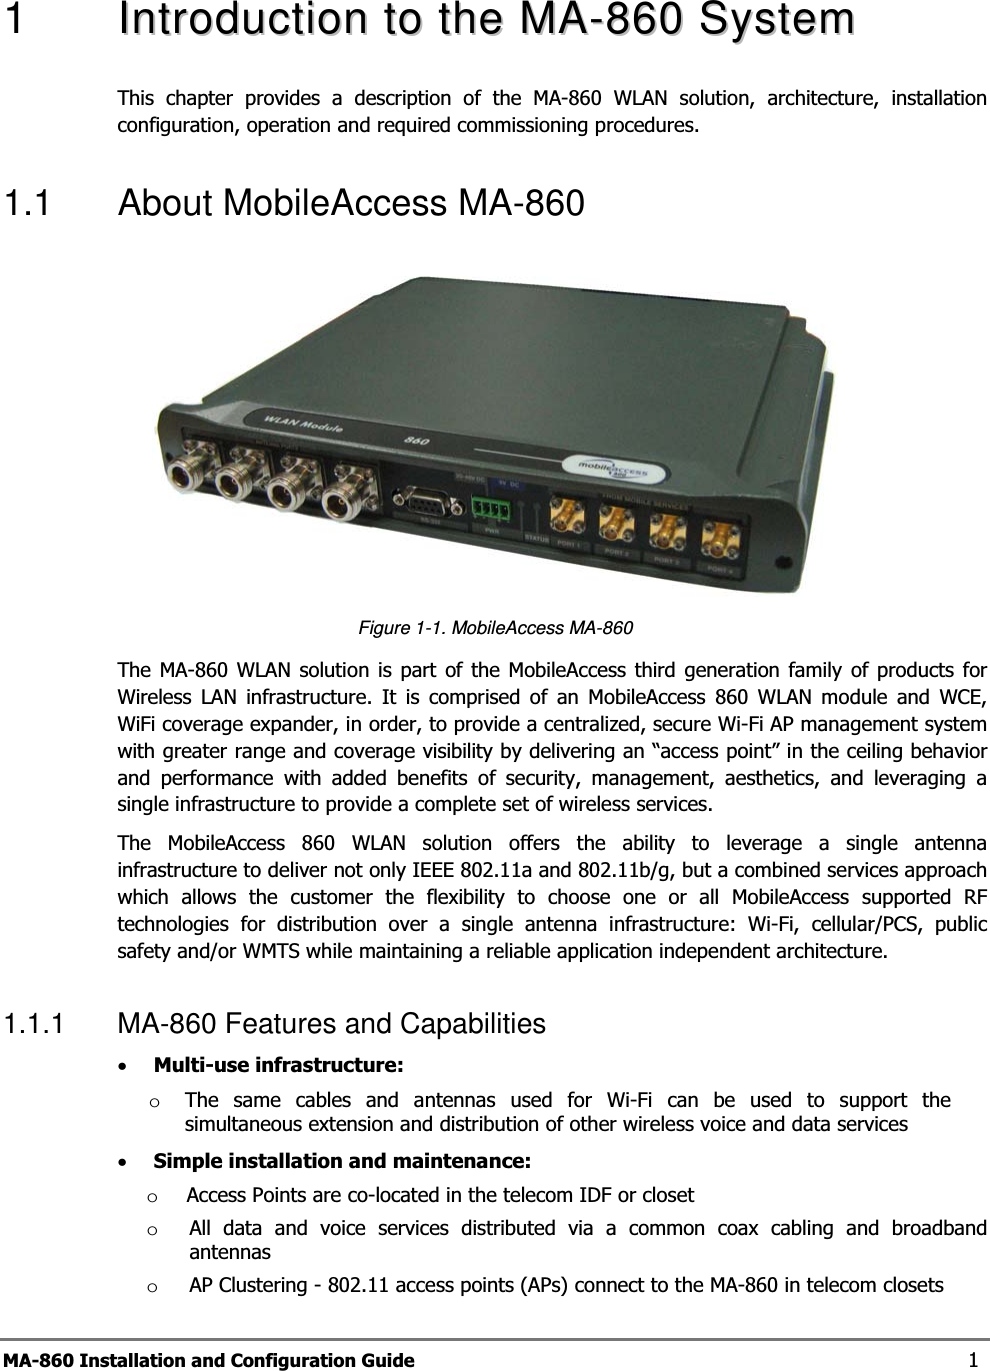 MA-860 Installation and Configuration Guide  1 1   IInnttrroodduuccttiioonnttootthheeMMAA--886600SSyysstteemmThis chapter provides a description of the MA-860 WLAN solution, architecture, installation configuration, operation and required commissioning procedures. 1.1  About MobileAccess MA-860  Figure  1-1. MobileAccess MA-860  The MA-860 WLAN solution is part of the MobileAccess third generation family of products for Wireless LAN infrastructure. It is comprised of an MobileAccess 860 WLAN module and WCE, WiFi coverage expander, in order, to provide a centralized, secure Wi-Fi AP management system with greater range and coverage visibility by delivering an “access point” in the ceiling behavior and performance with added benefits of security, management, aesthetics, and leveraging a single infrastructure to provide a complete set of wireless services. The MobileAccess 860 WLAN solution offers the ability to leverage a single antenna infrastructure to deliver not only IEEE 802.11a and 802.11b/g, but a combined services approach which allows the customer the flexibility to choose one or all MobileAccess supported RF technologies for distribution over a single antenna infrastructure: Wi-Fi, cellular/PCS, public safety and/or WMTS while maintaining a reliable application independent architecture. 1.1.1  MA-860 Features and Capabilities •Multi-use infrastructure: oThe same cables and antennas used for Wi-Fi can be used to support the simultaneous extension and distribution of other wireless voice and data services •Simple installation and maintenance:  oAccess Points are co-located in the telecom IDF or closet oAll data and voice services distributed via a common coax cabling and broadband antennas oAP Clustering - 802.11 access points (APs) connect to the MA-860 in telecom closets 